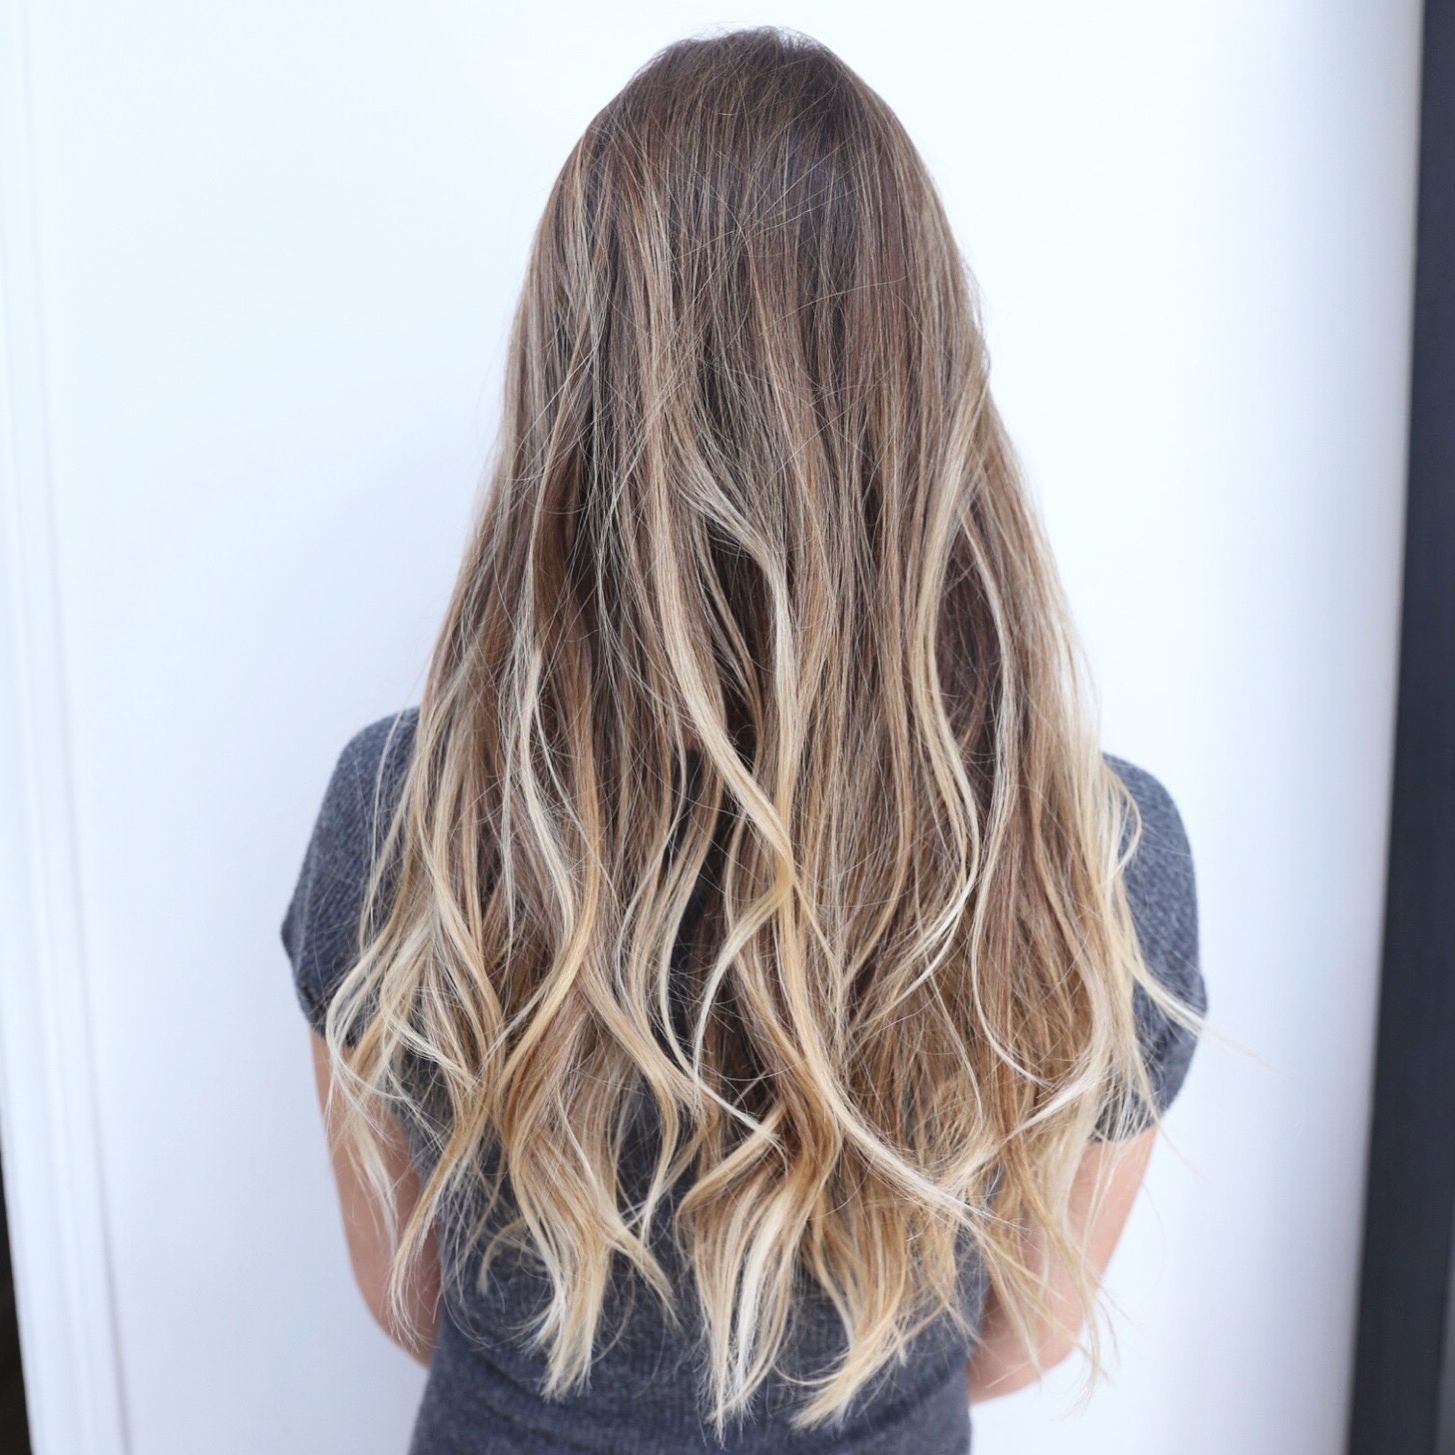 Current Beachy Waves With Ombre Intended For Beachy Ombre Highlight — Stephen Garrison (Gallery 4 of 18)